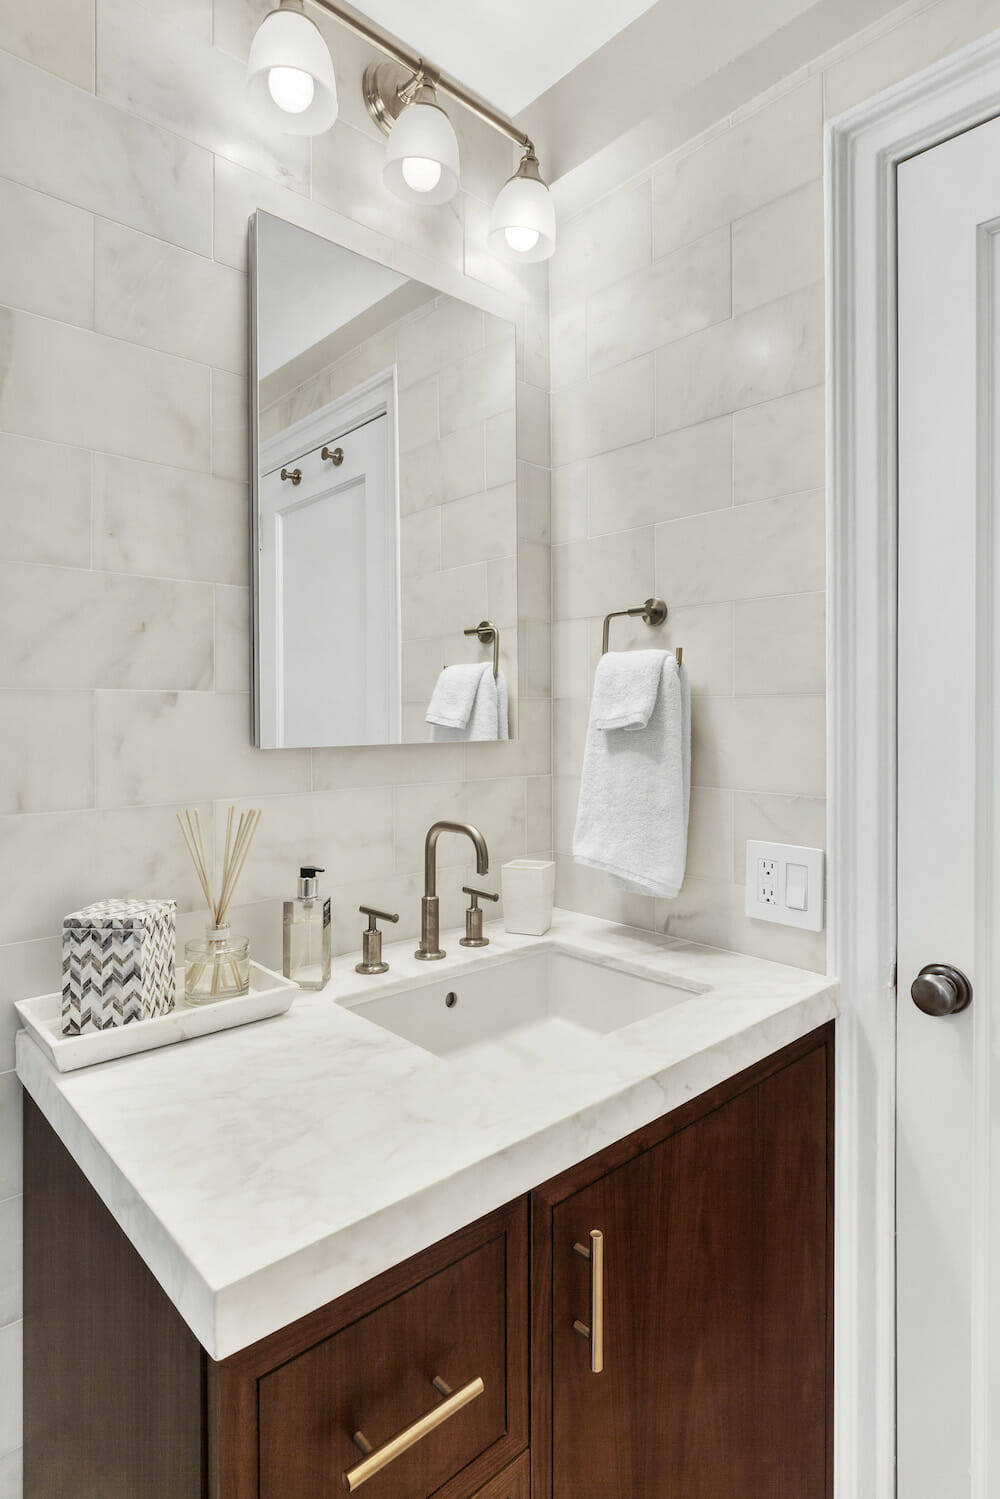 wood bathroom vanity with white marble countertop and undermount sink with brass faucet and white marble tiles on wall and medicine cabinet with mirror after renovation